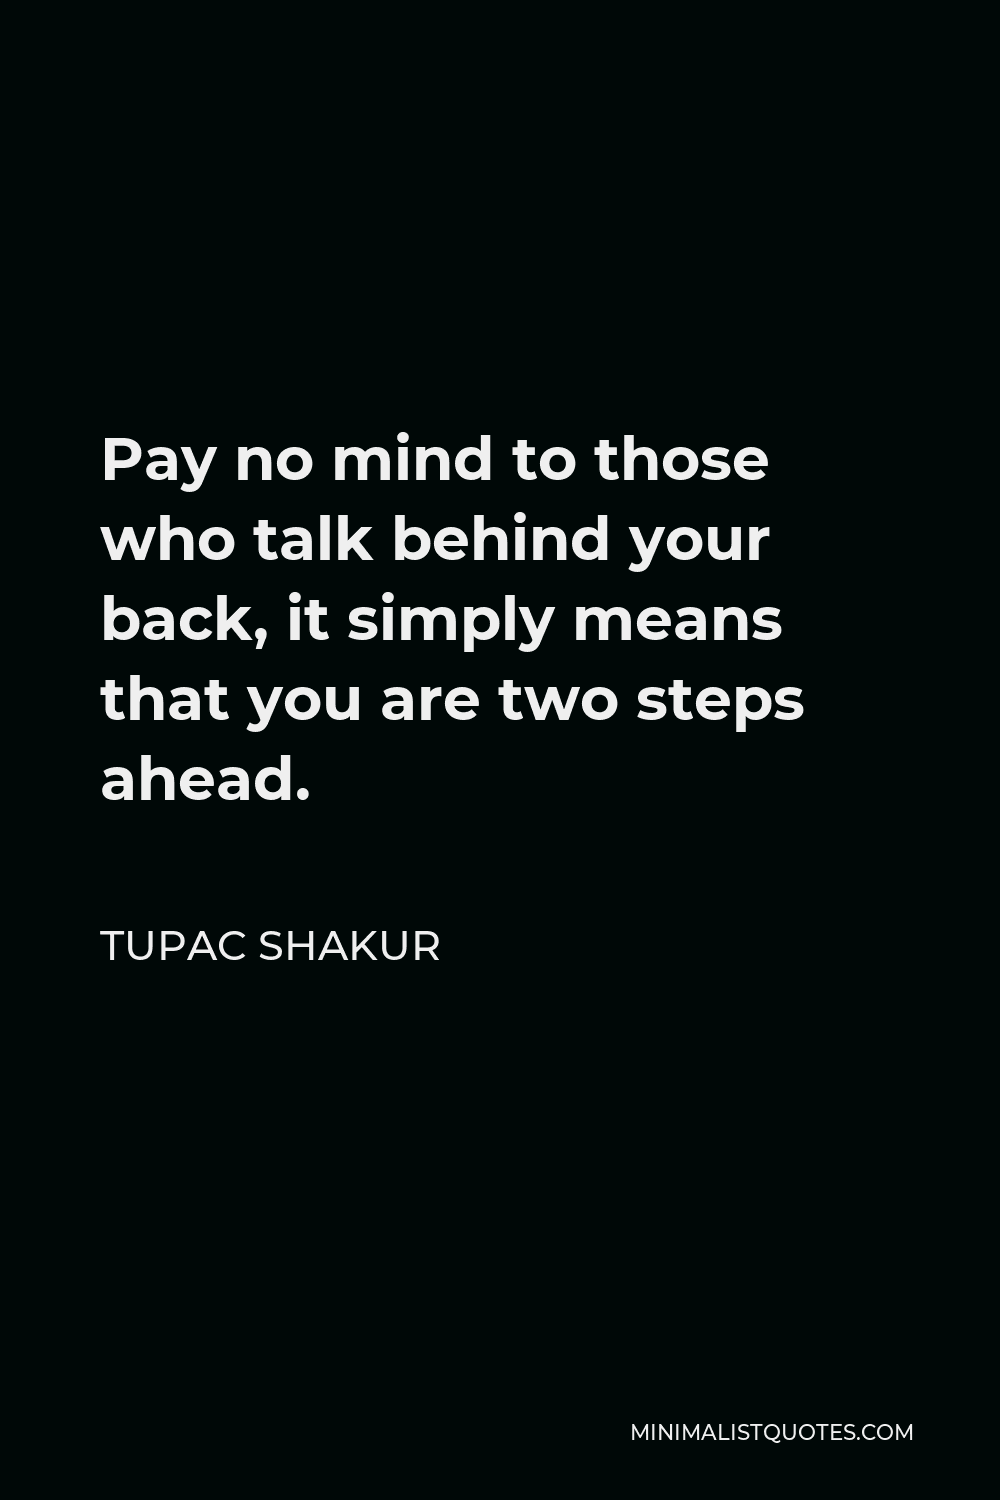 Tupac Shakur Quote - Pay no mind to those who talk behind your back, it simply means that you are two steps ahead.